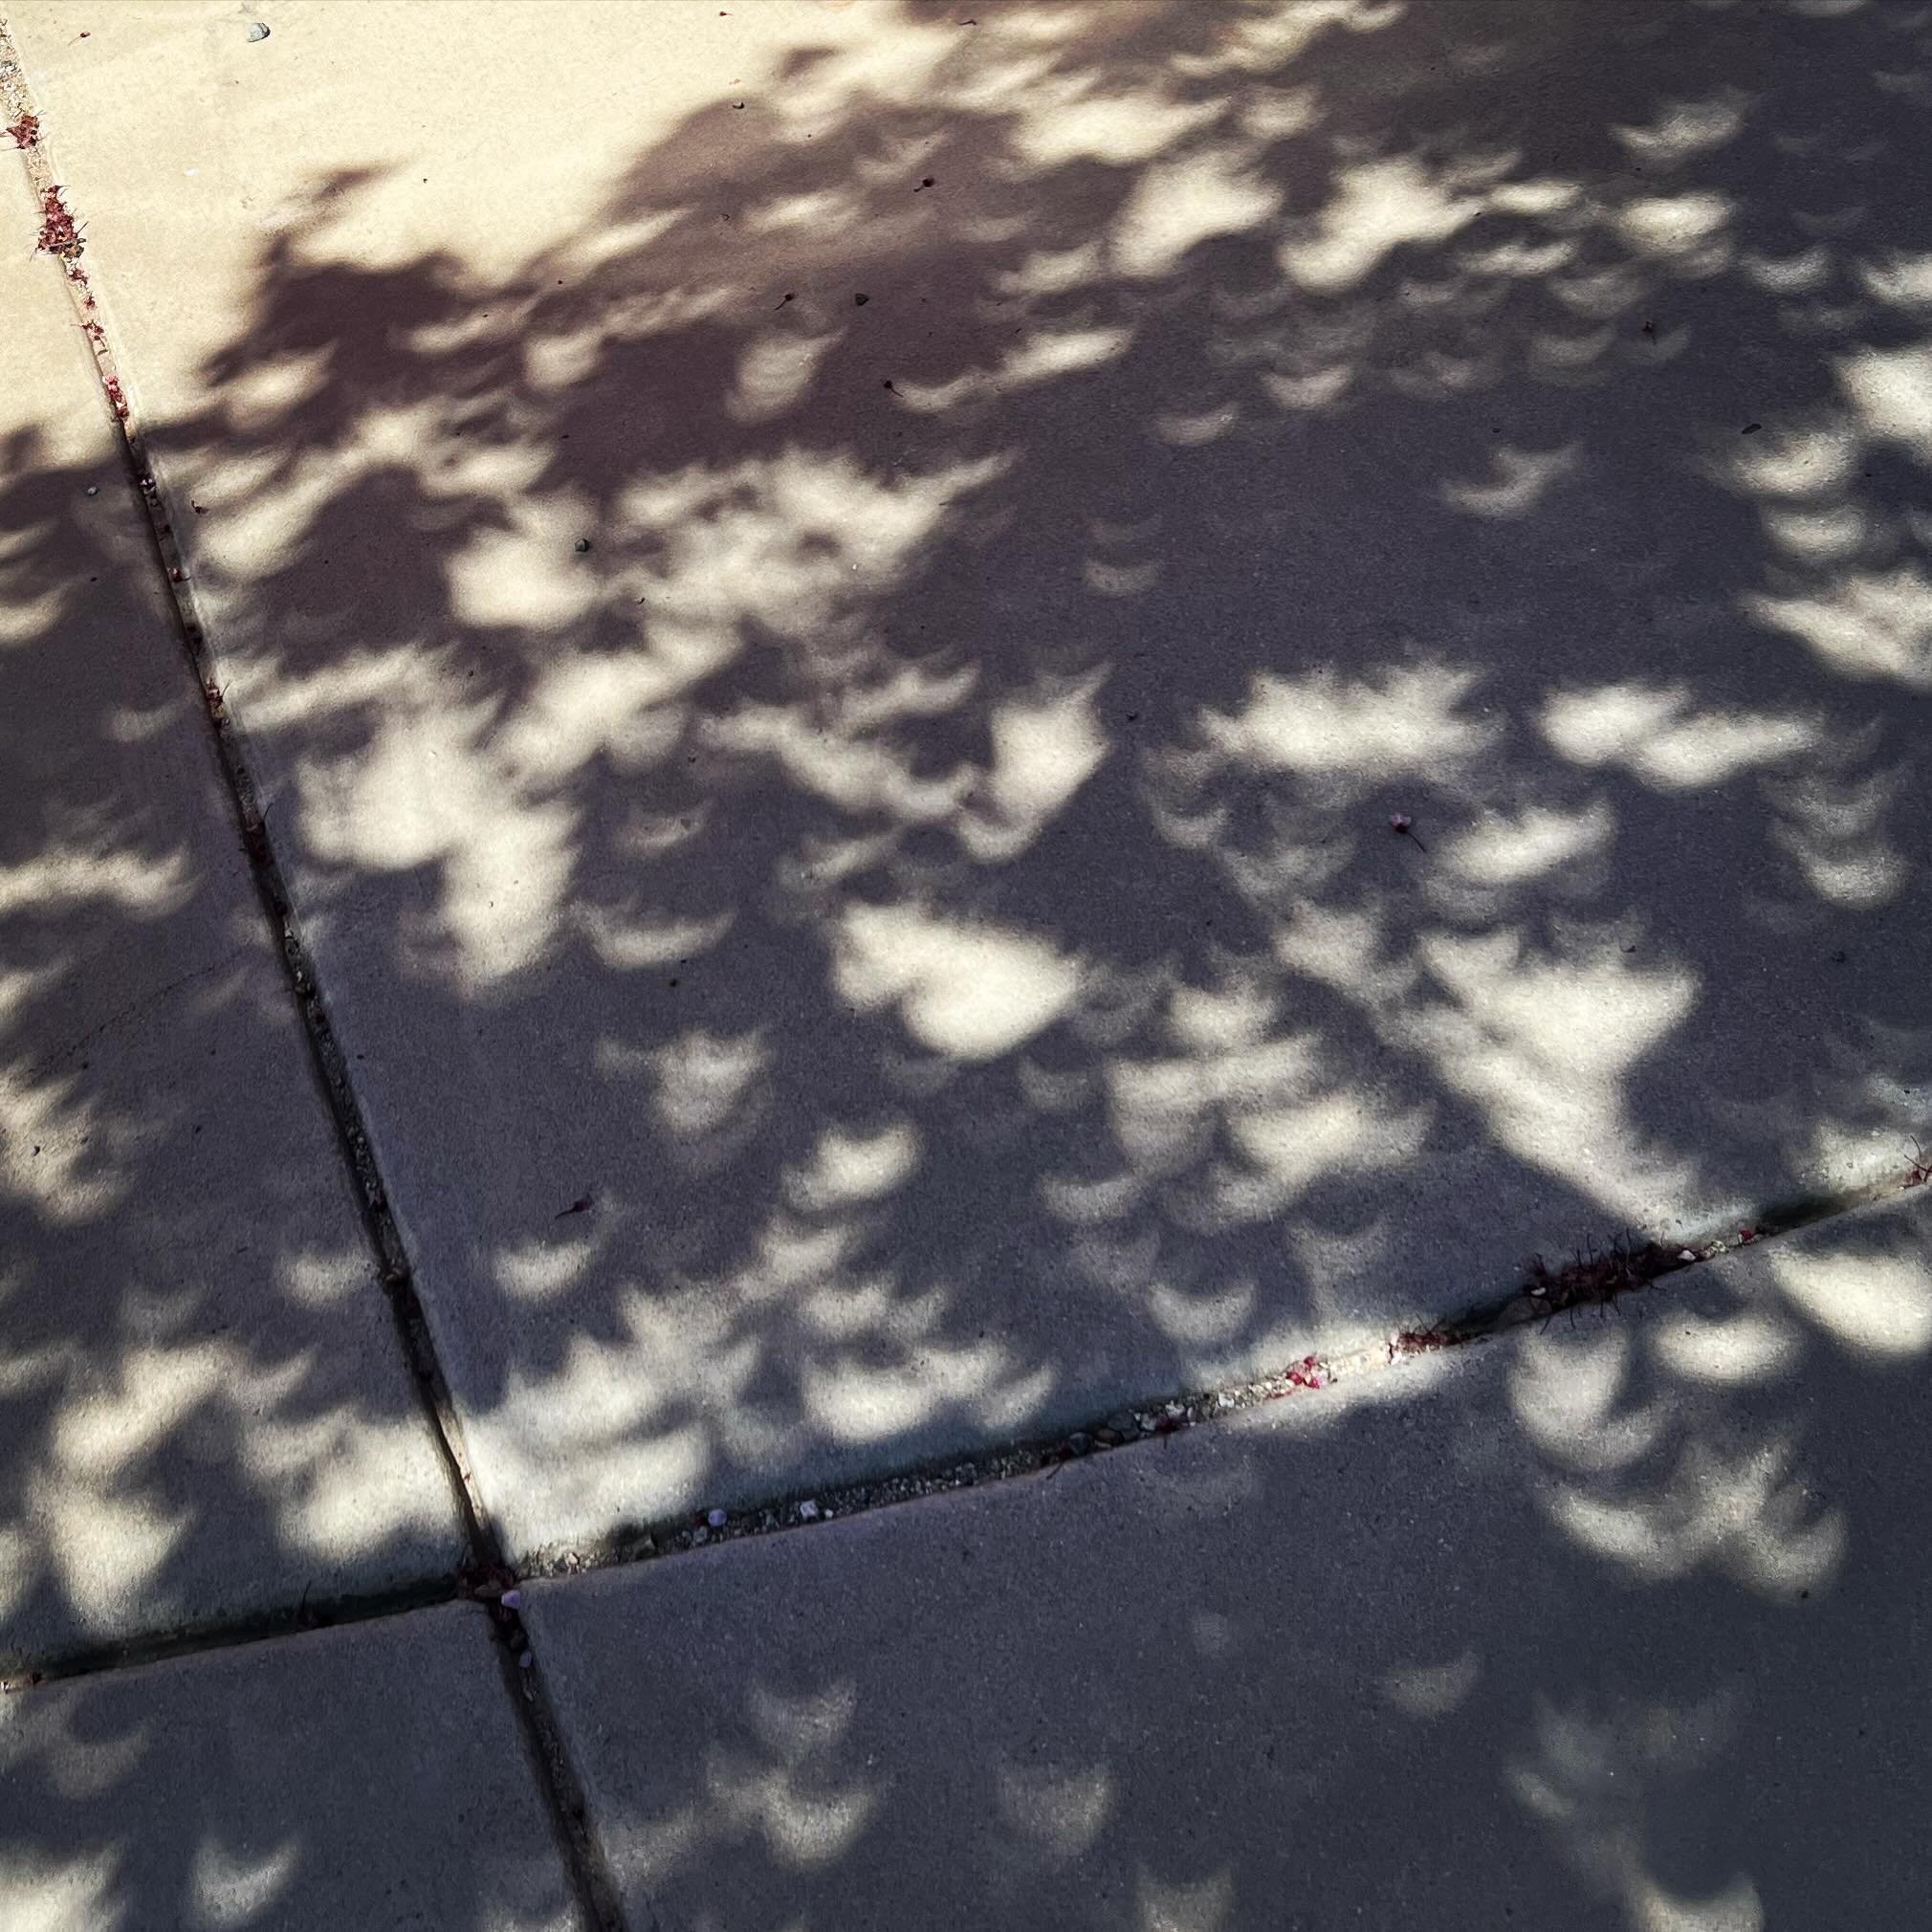 The light coming from the eclipse through the trees left small crescent shapes in the shadows on the ground. Happy Eclipse Day 2024.